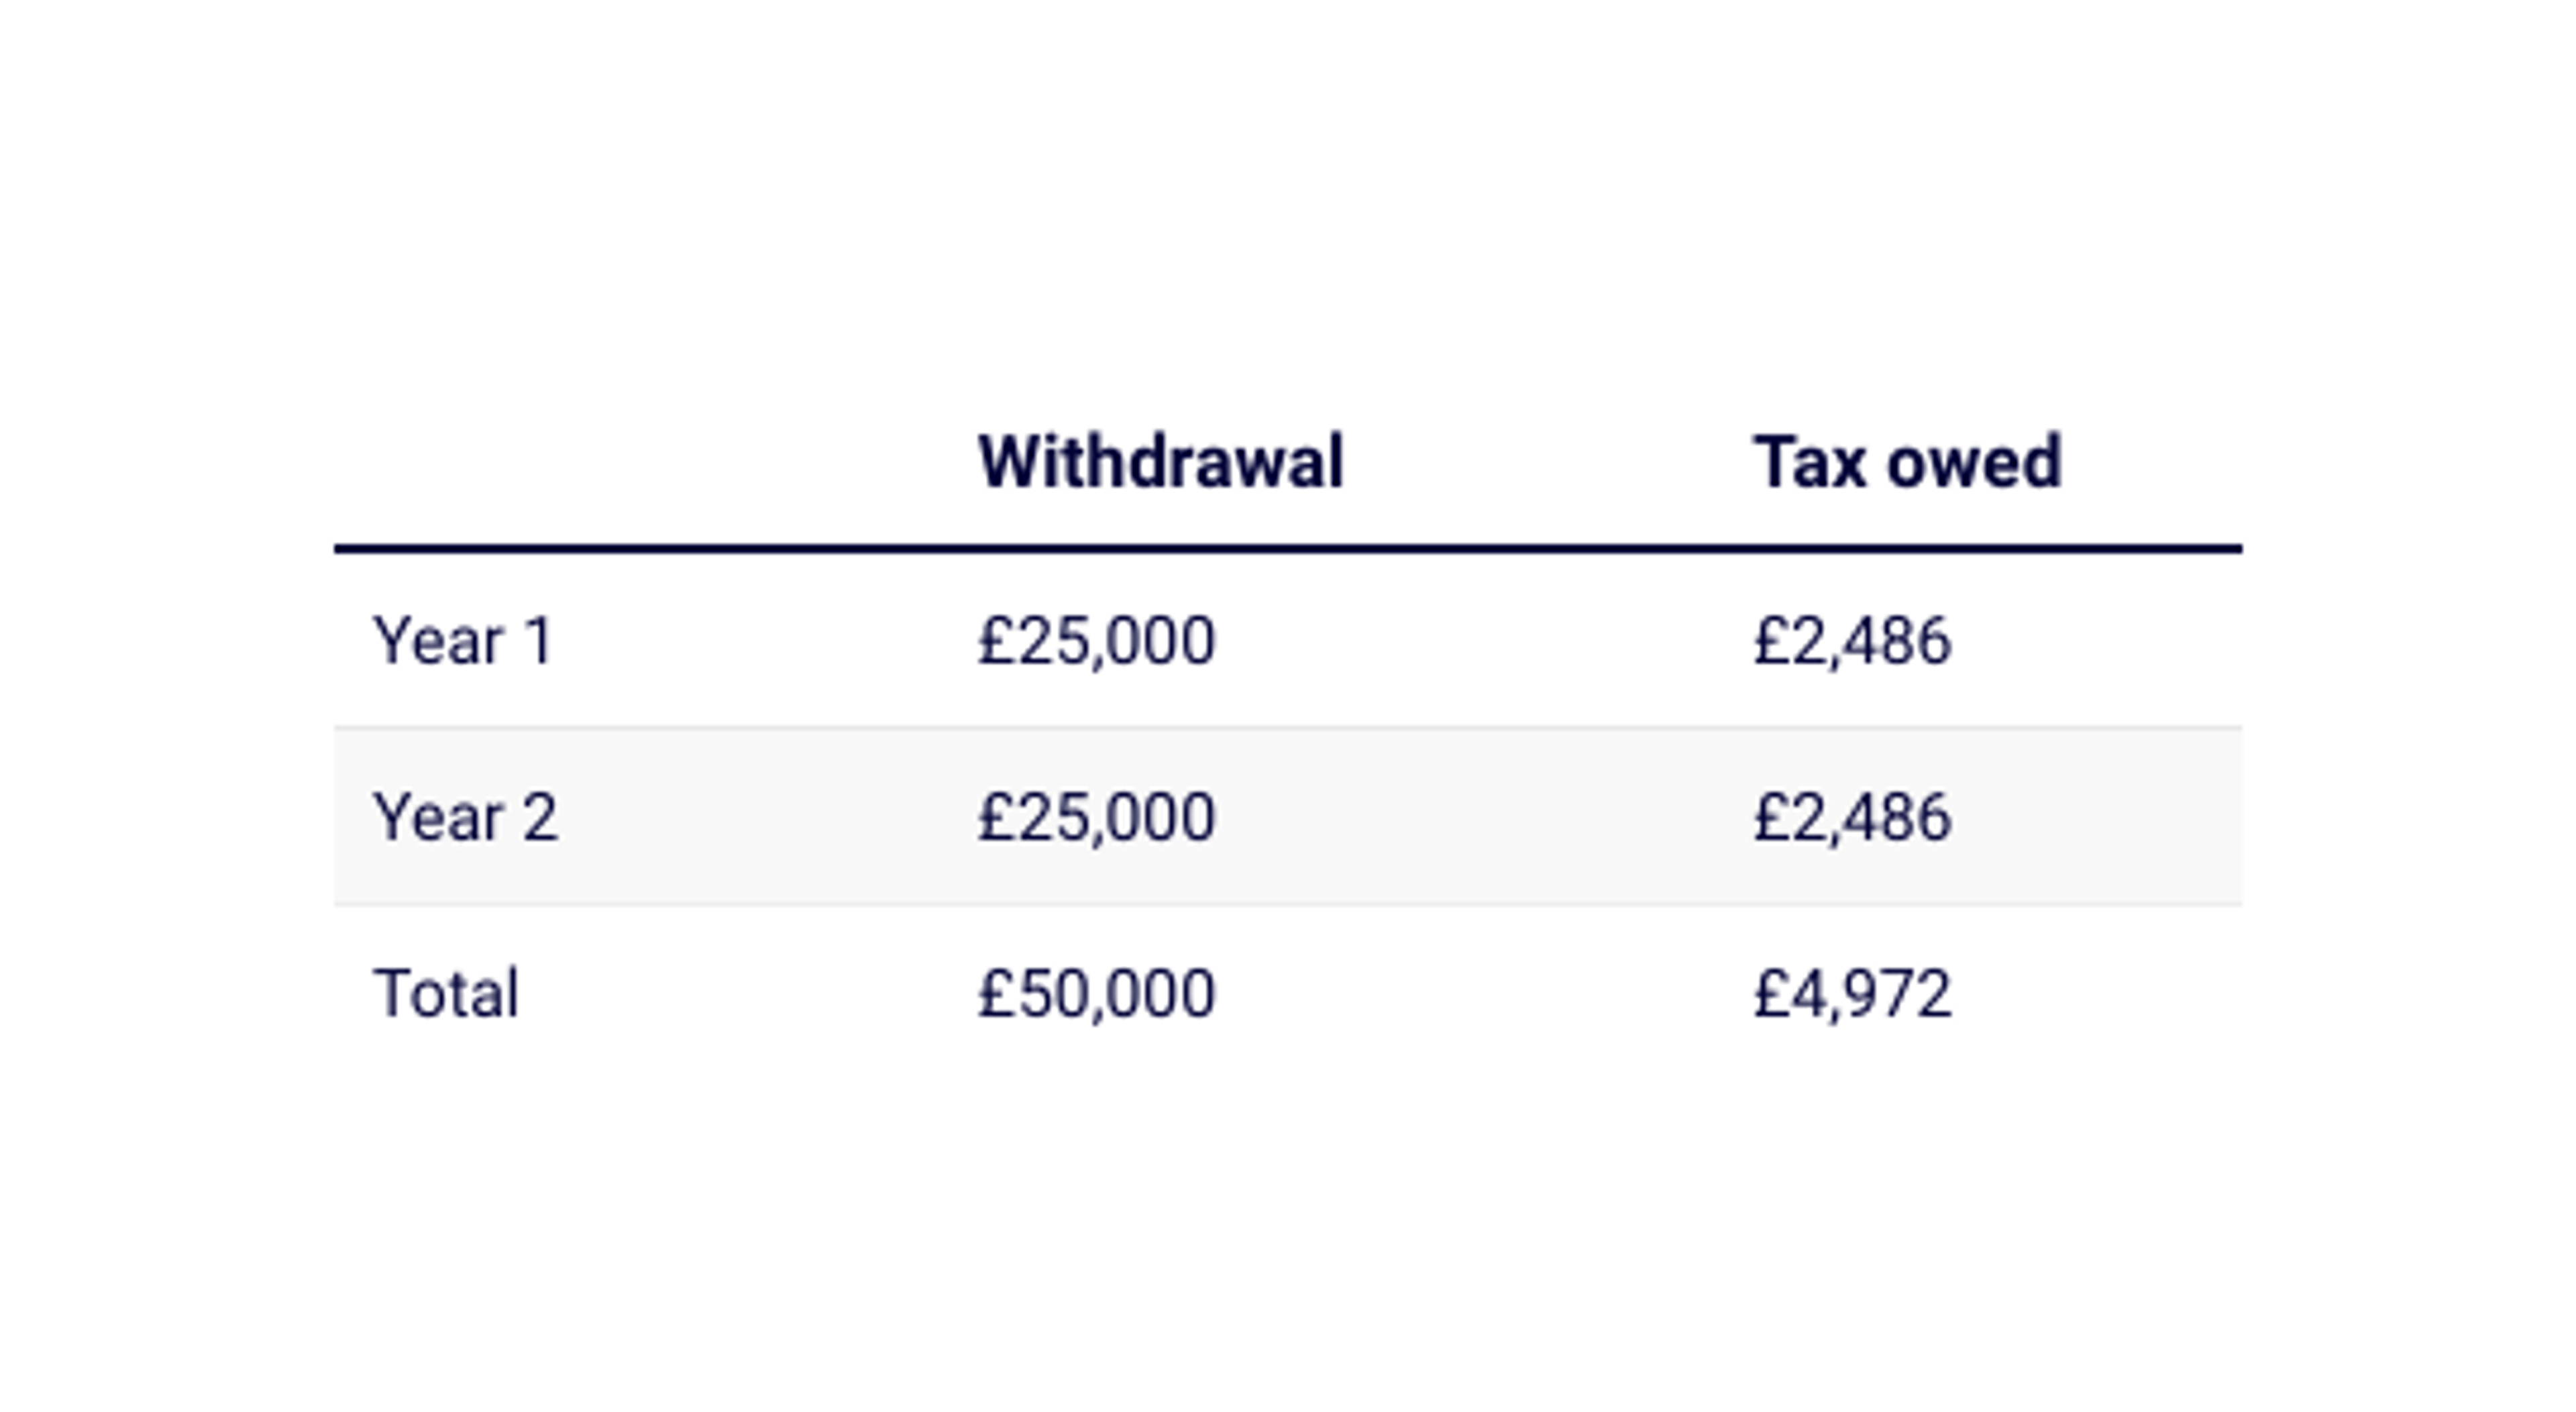 Table showing pension withdrawal tax owed when more efficient